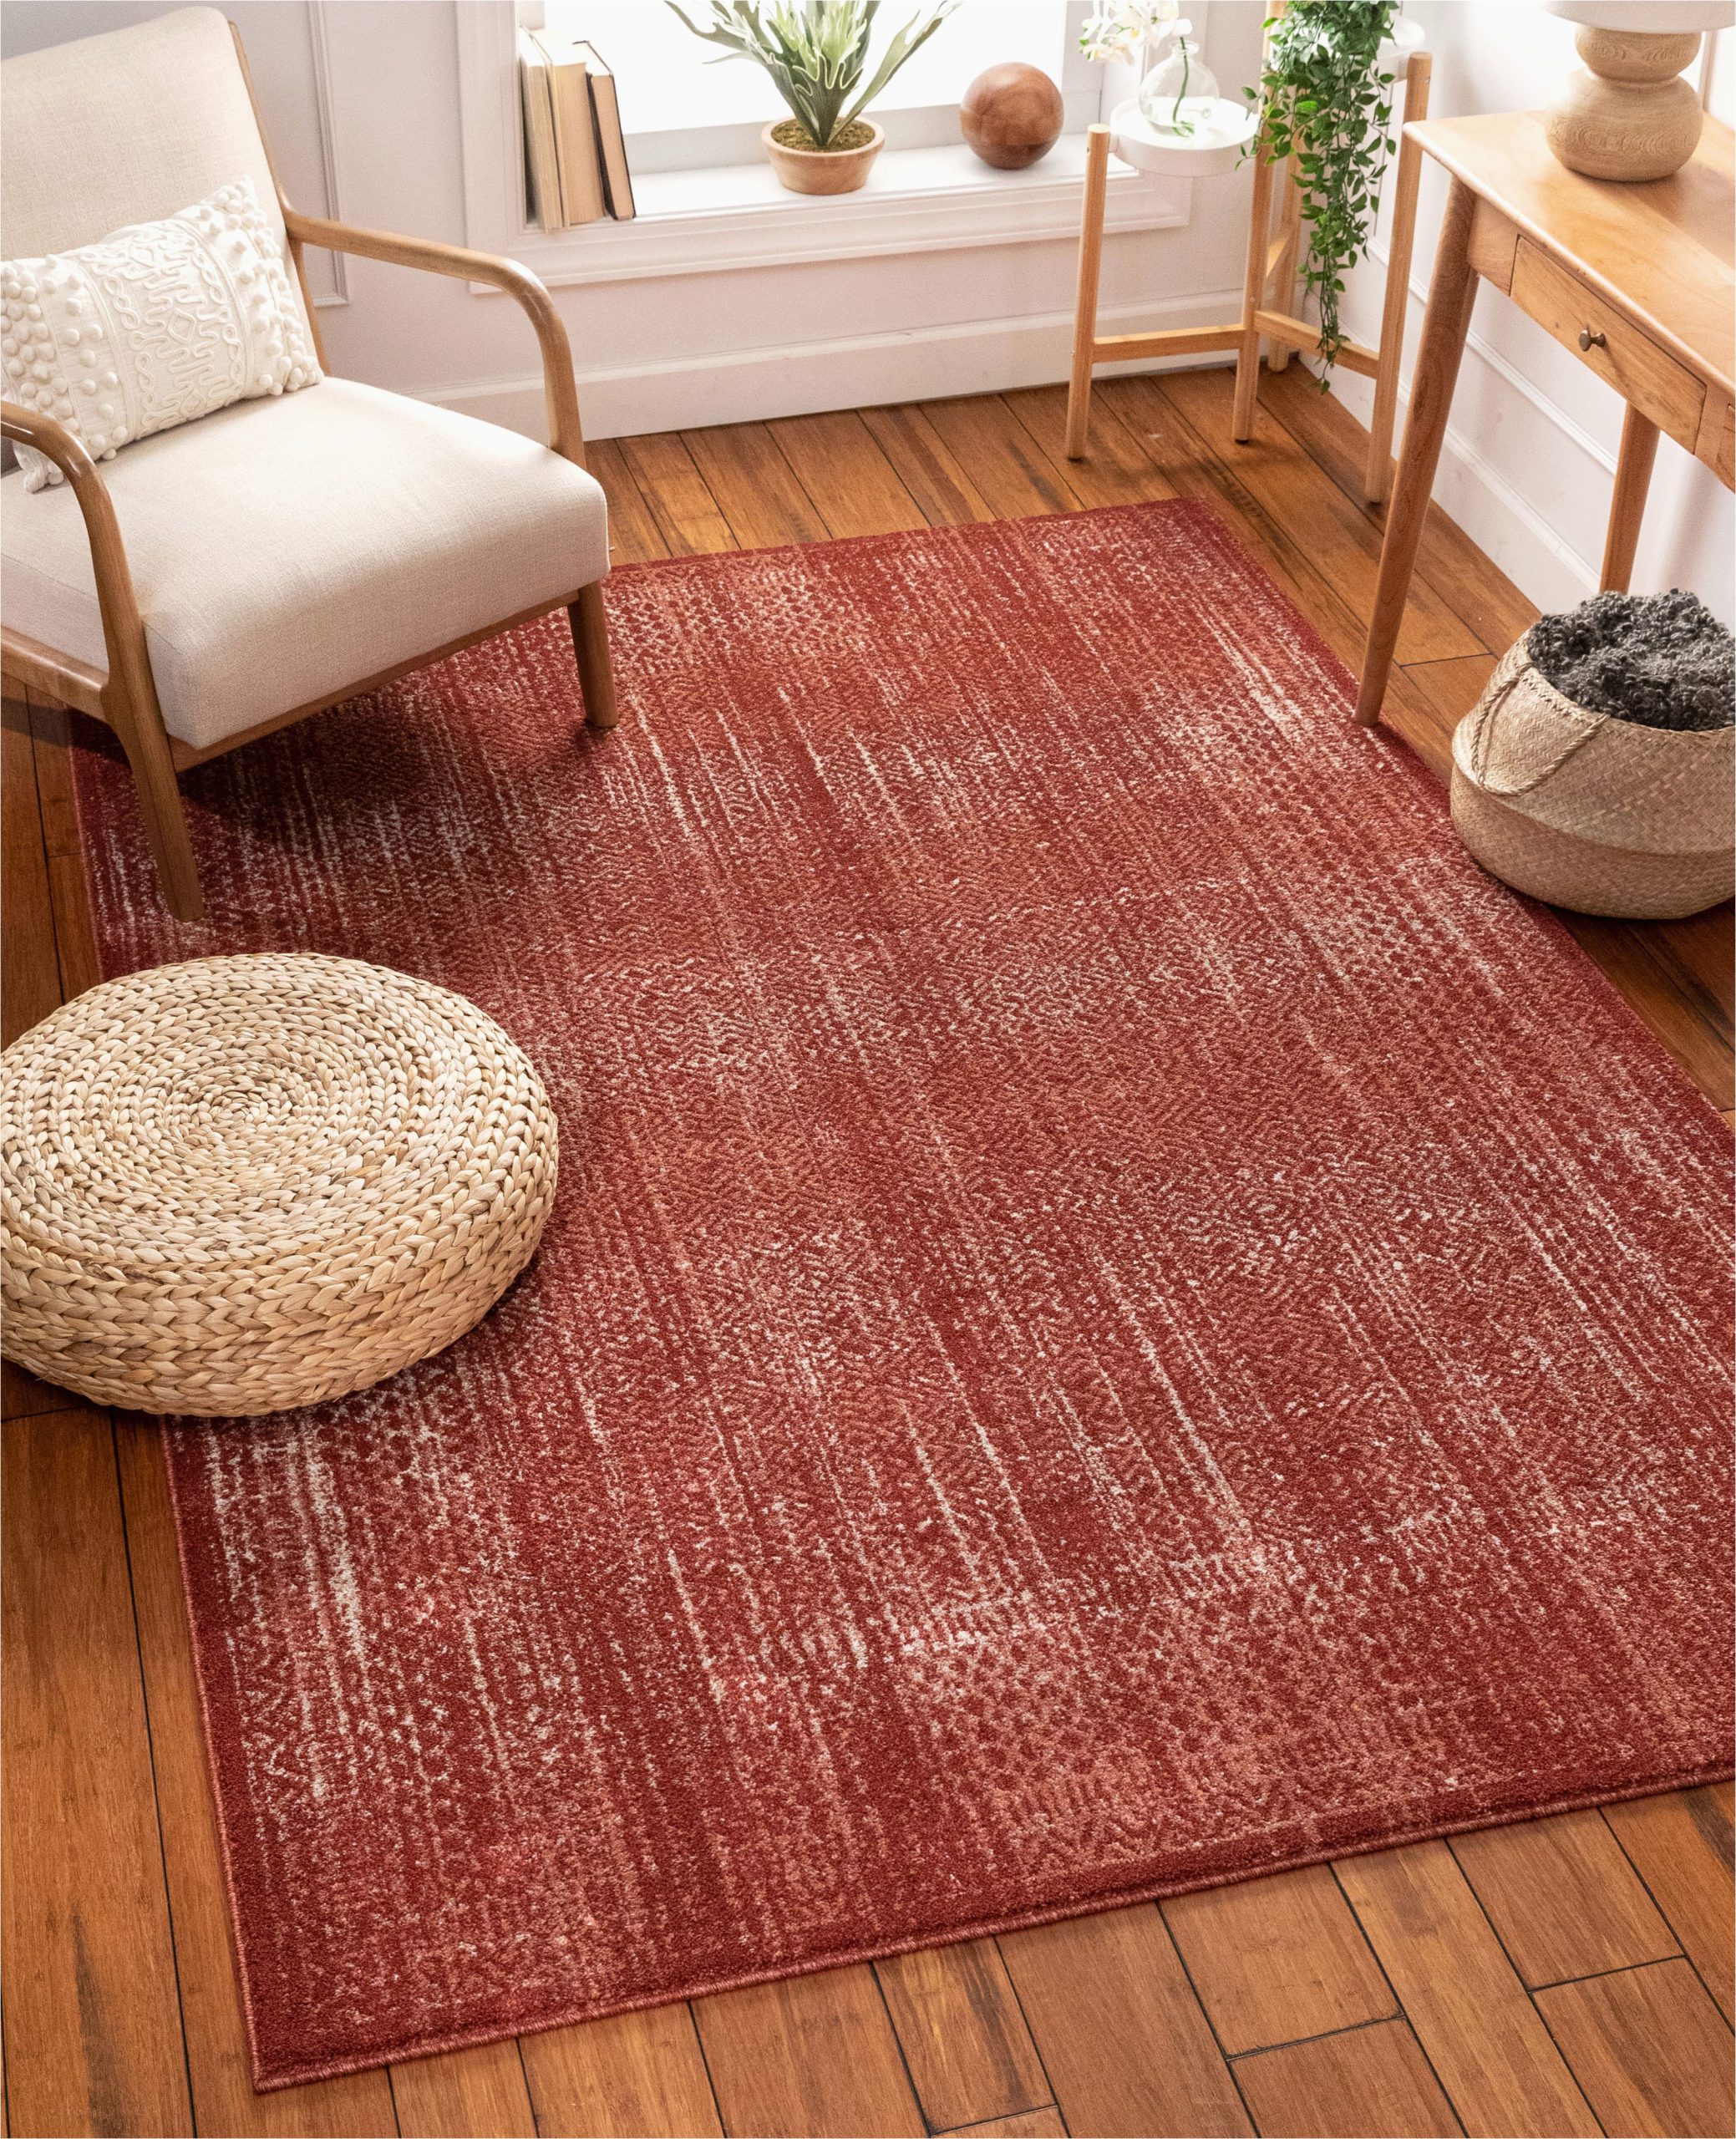 Red and Brown area Rugs Walmart Well Woven Ennie Red Vintage oriental Pattern area Rug